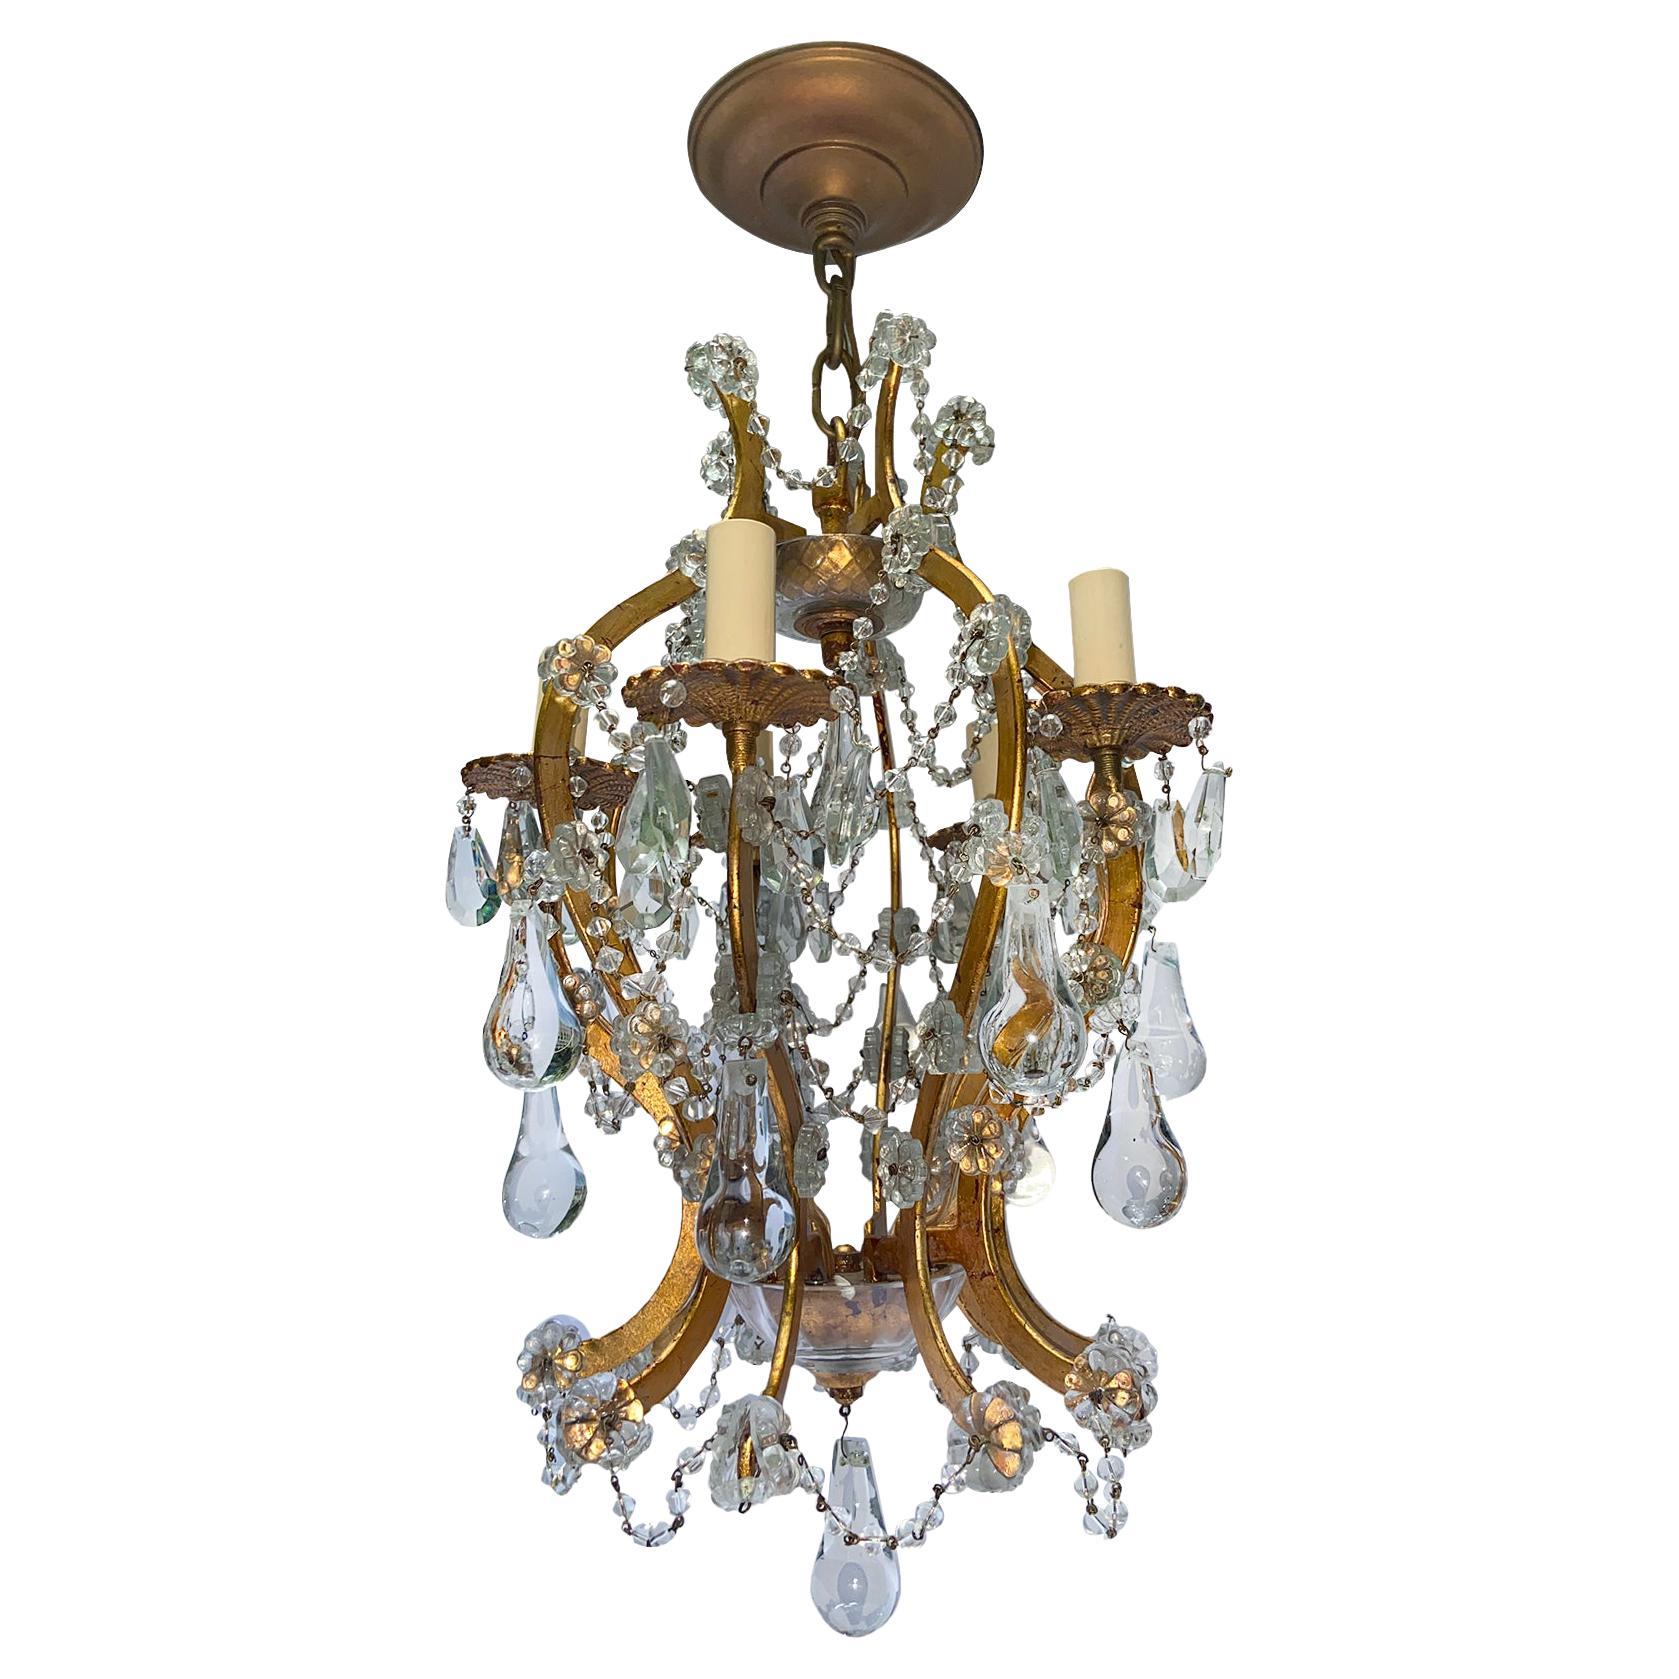 Set of Crystal & Gilt Metal Chandeliers, Sold Individually